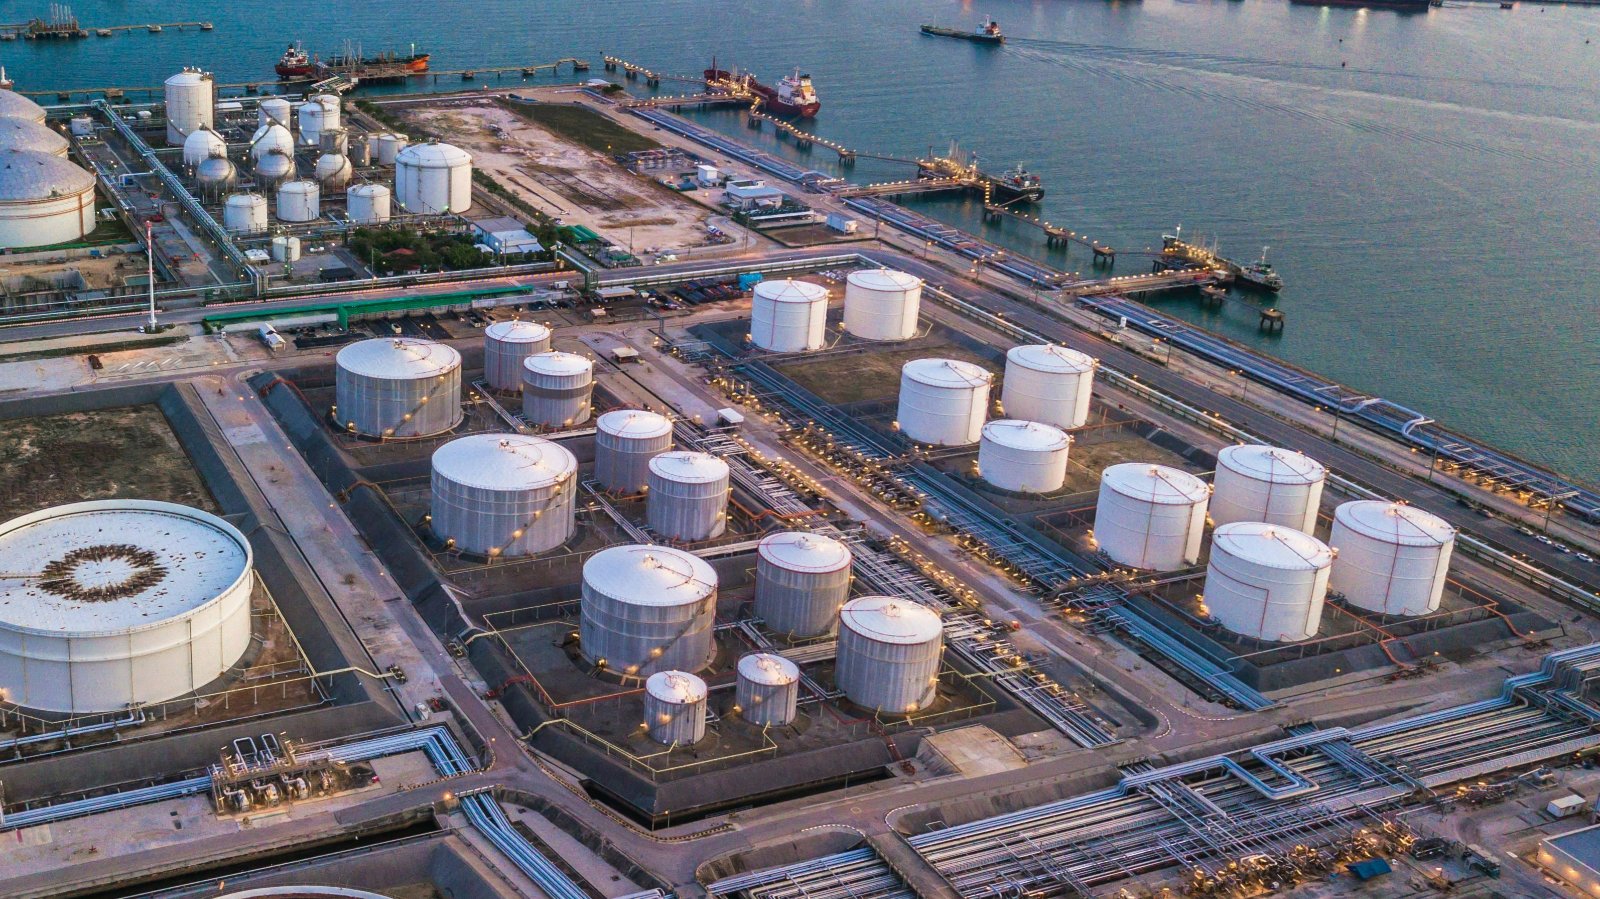 In The News: SOC to Help Secure DOE Petroleum Storage Under $123M Contract